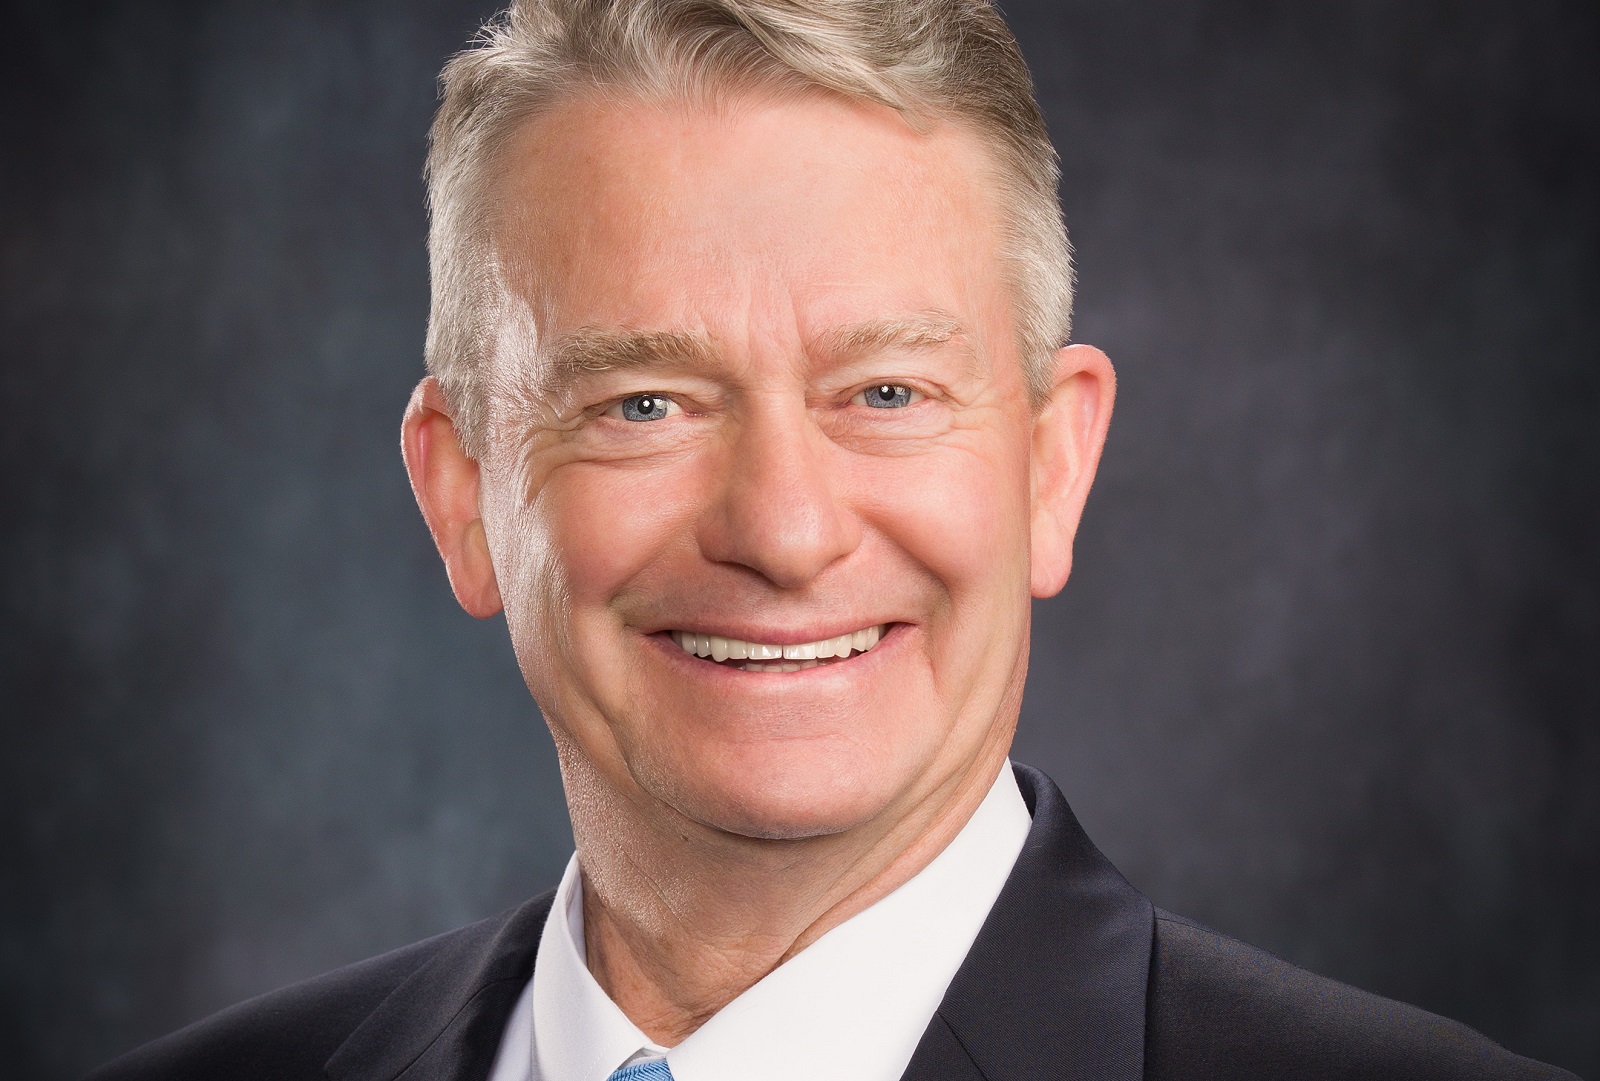 Republican Idaho governor Brad Little is focusing on attacking trans people